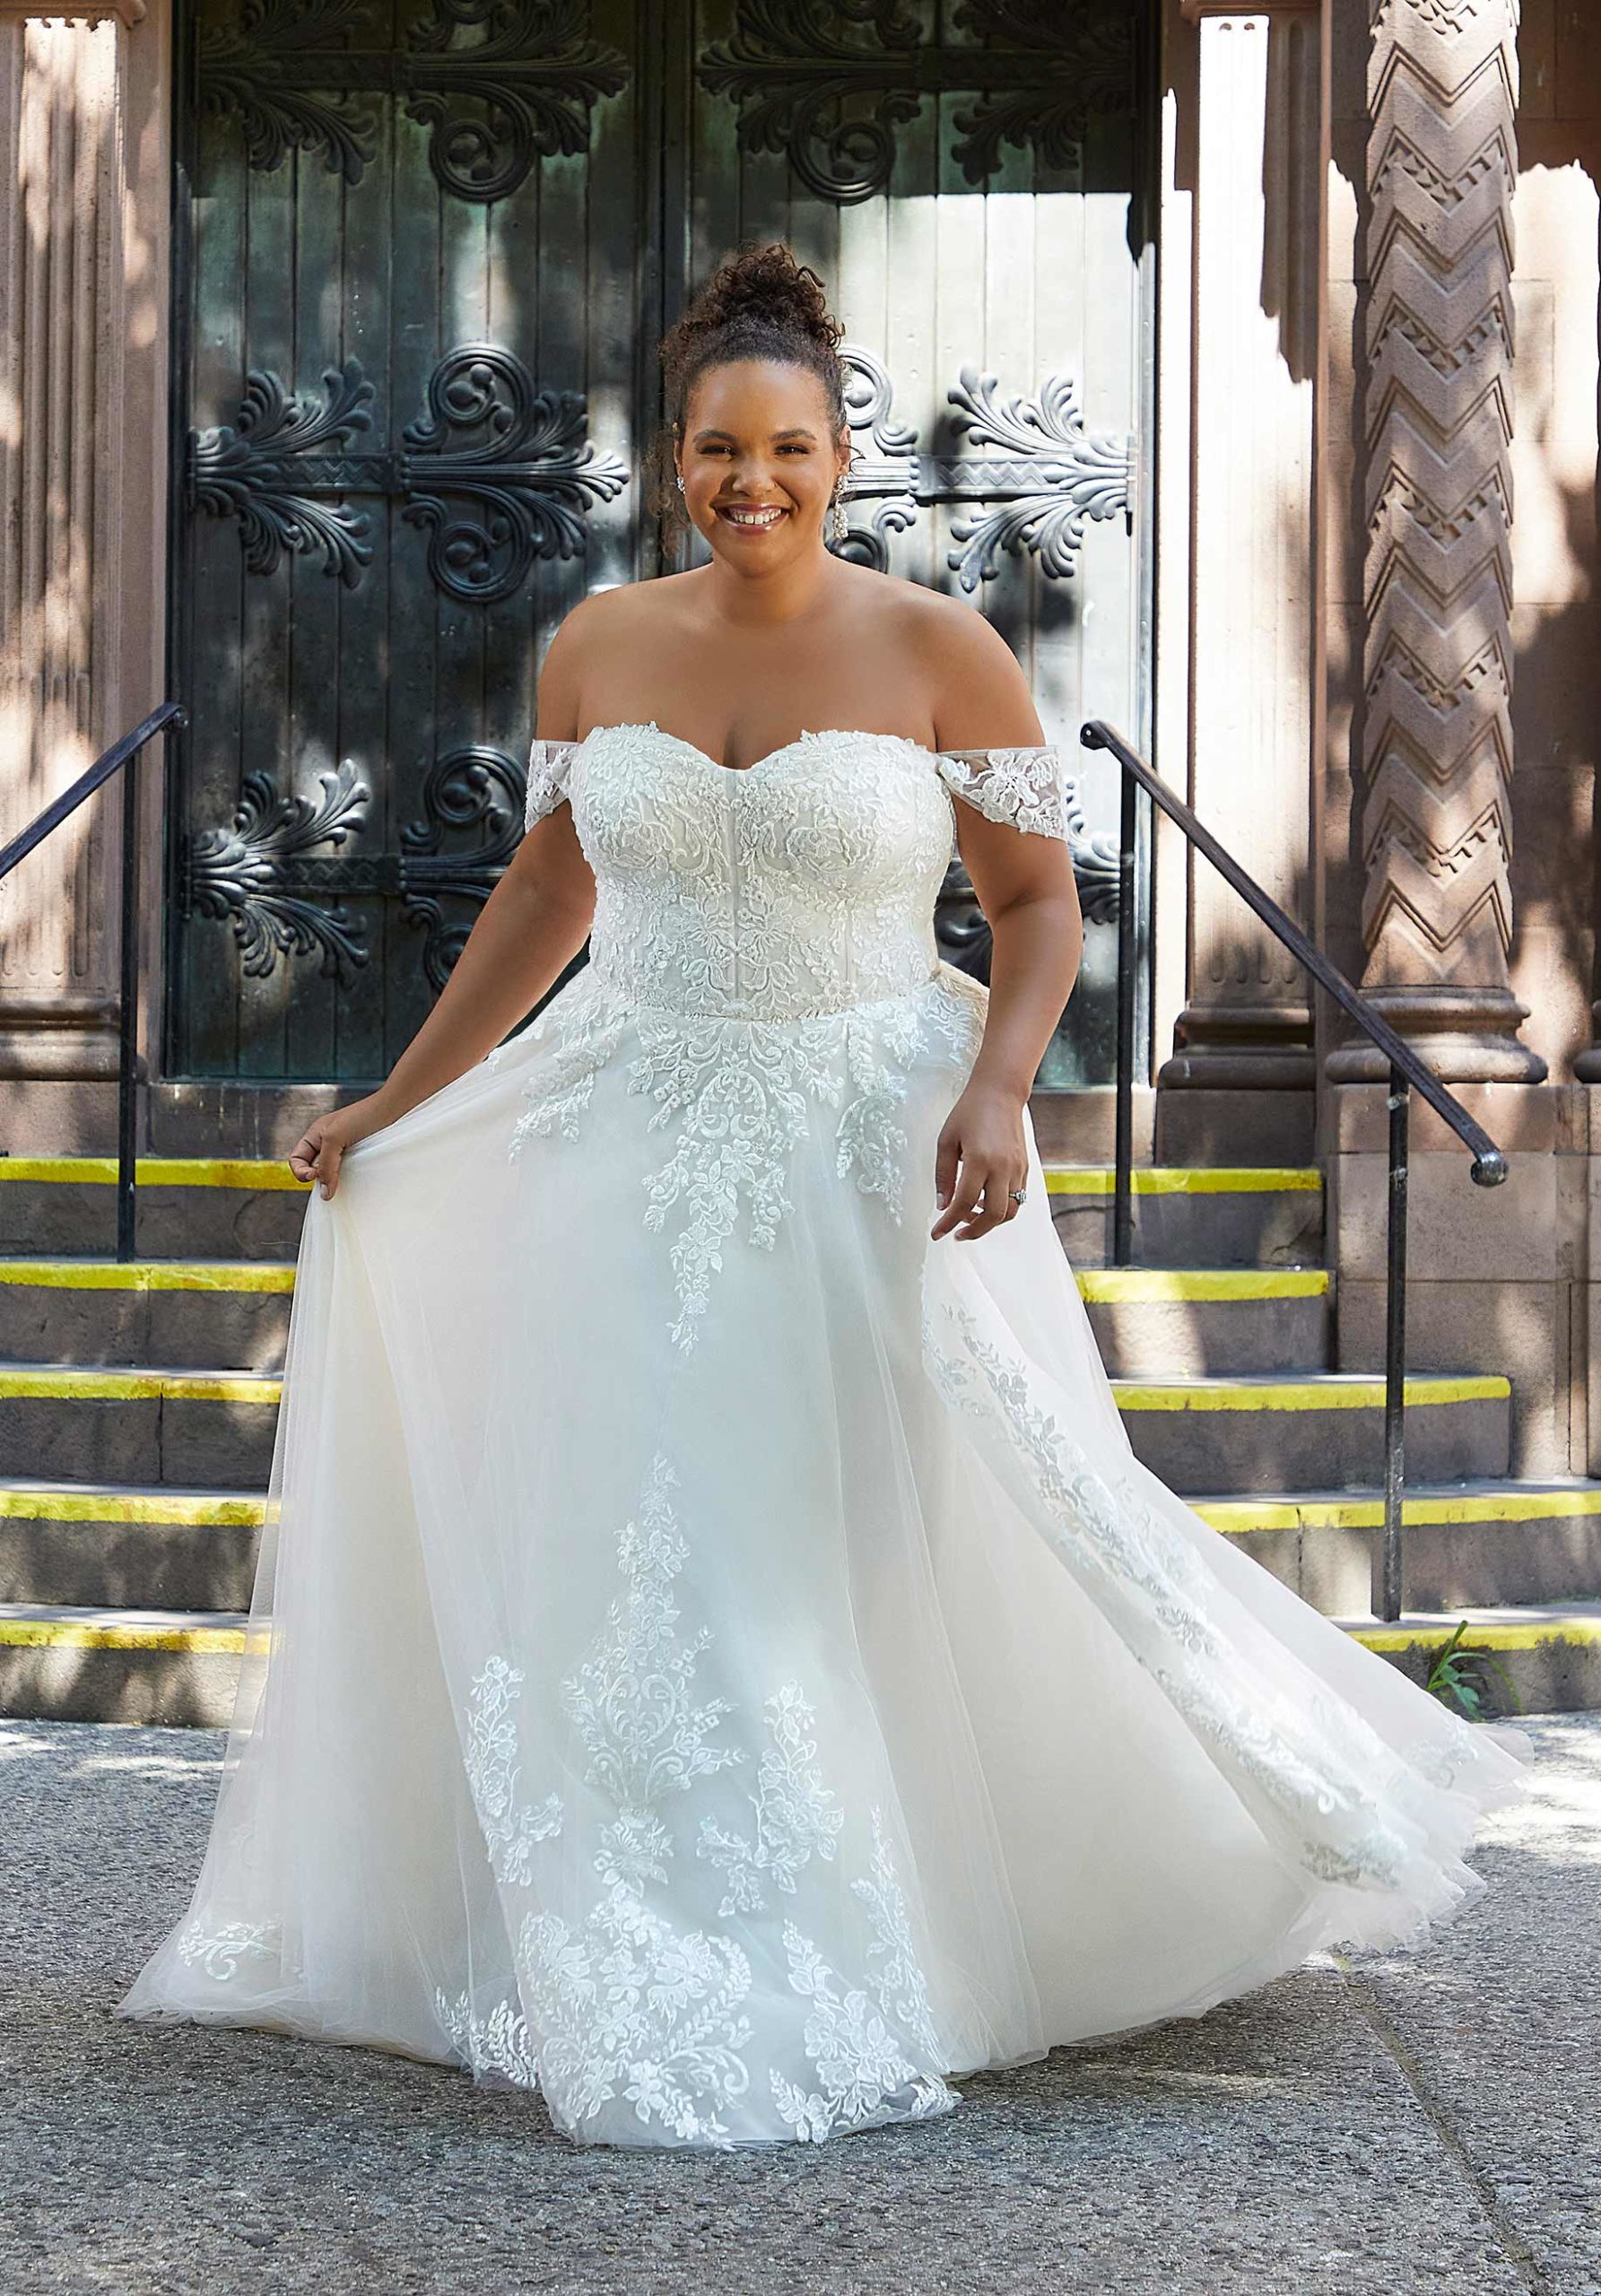 12 MAGICAL Non-Traditional Plus Size Wedding Dress Ideas You'll